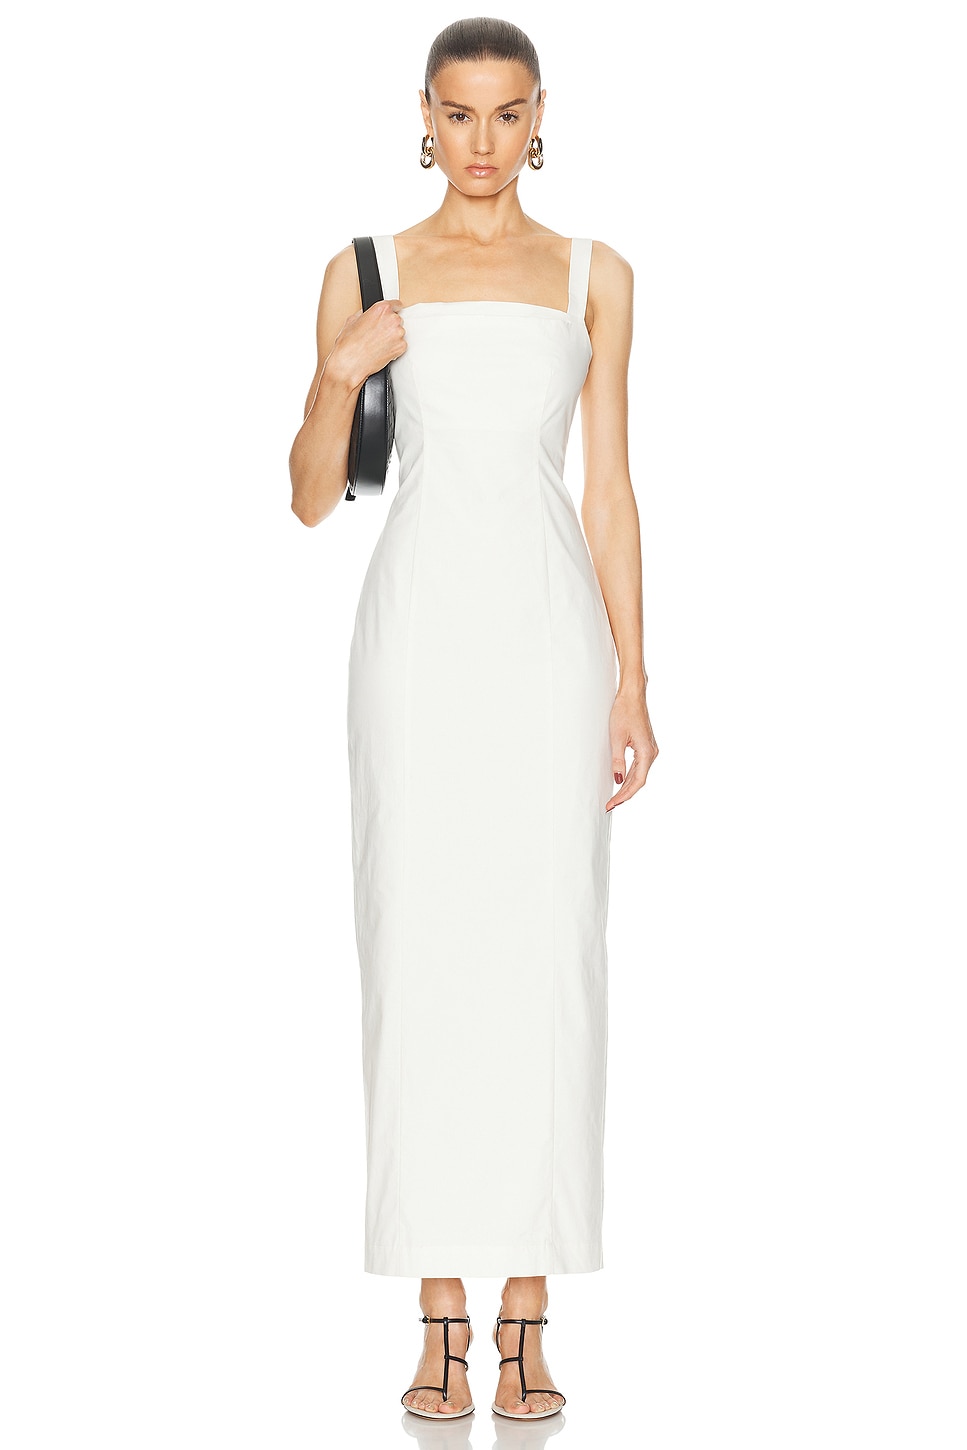 Image 1 of L'Academie by Marianna Renia Maxi Dress in Ivory